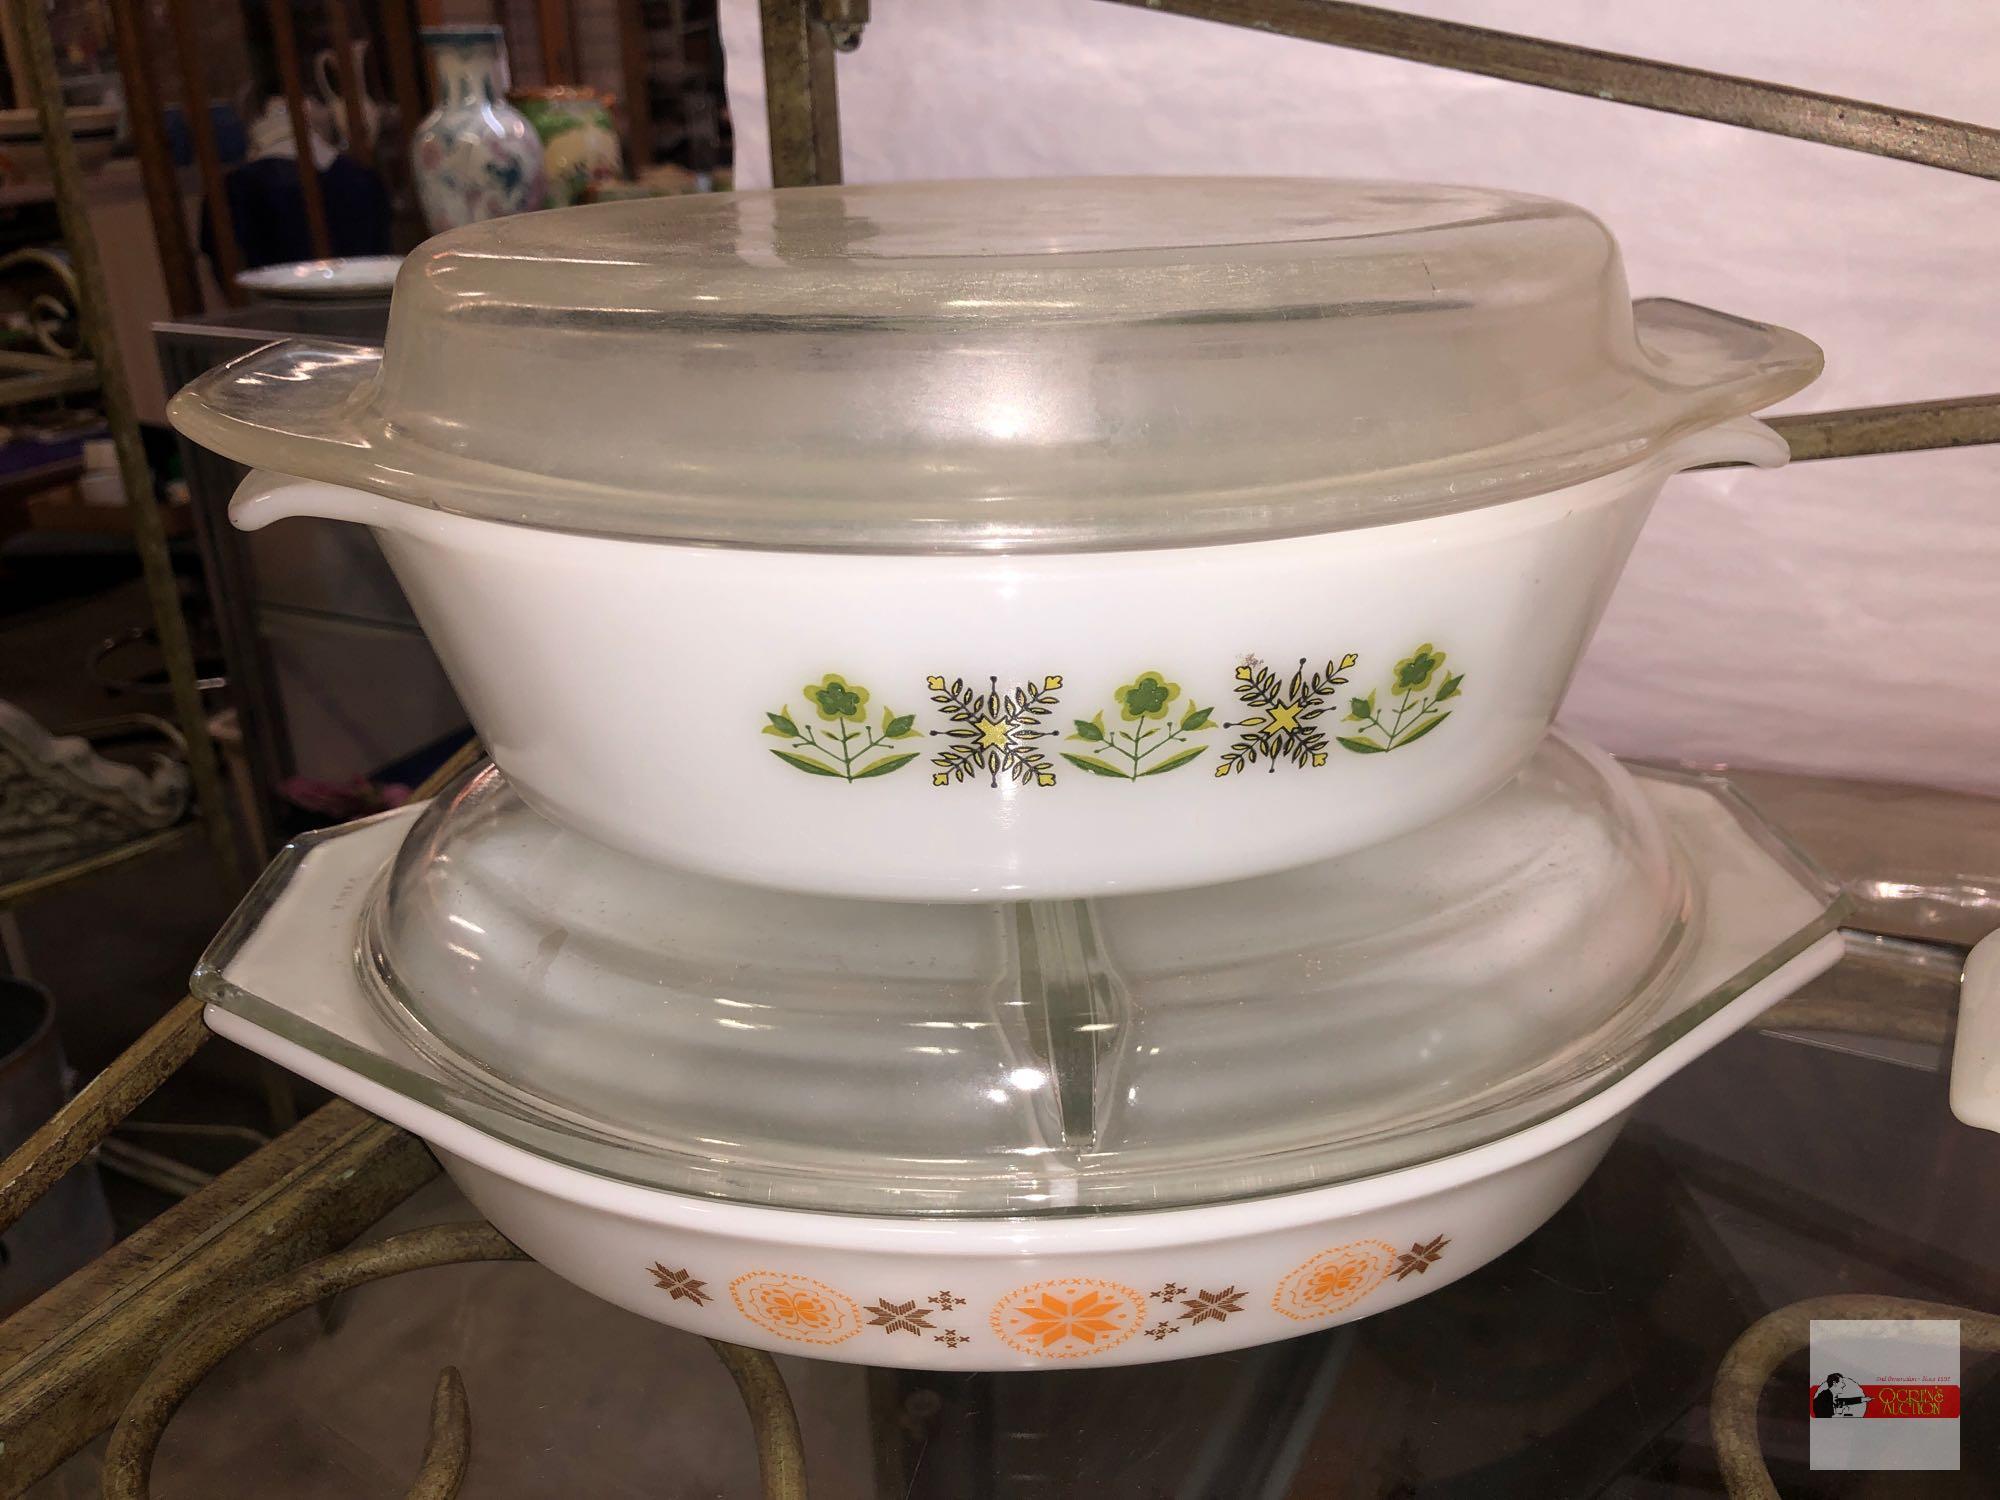 Cookware/bakeware - Pyrex casserole dishes and lids, Corning warming stand with lid but no dish